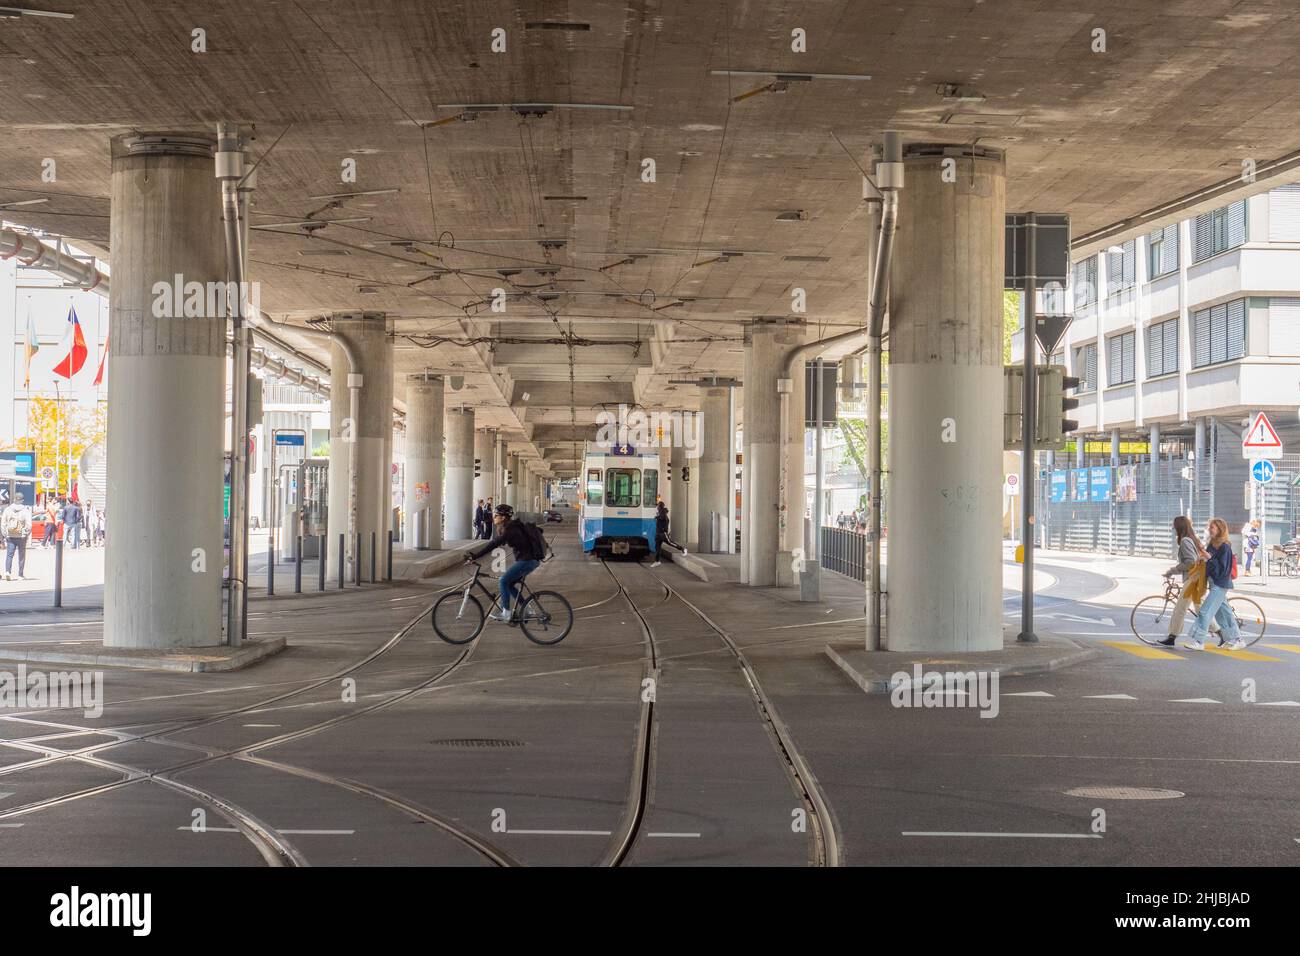 Zurich, Switzerland - May 23rd 2021: Traffic situation under the concrete viaduct of a main arterial road Stock Photo